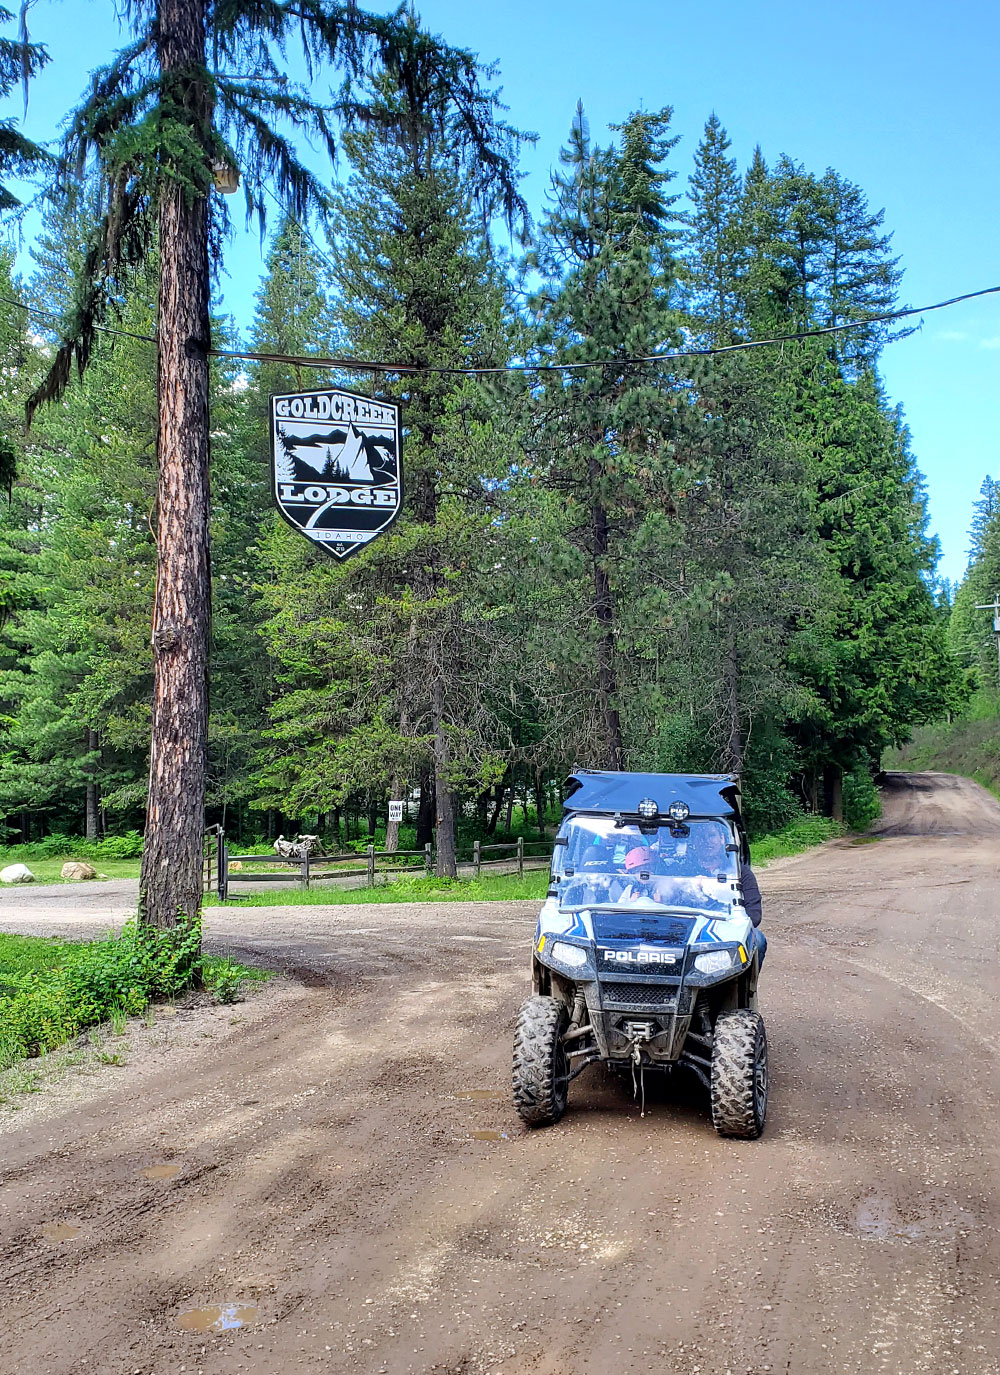 RZR off-road ride and stop for lunch at Gold Creek Lodge near Coeur d'Alene National Forest